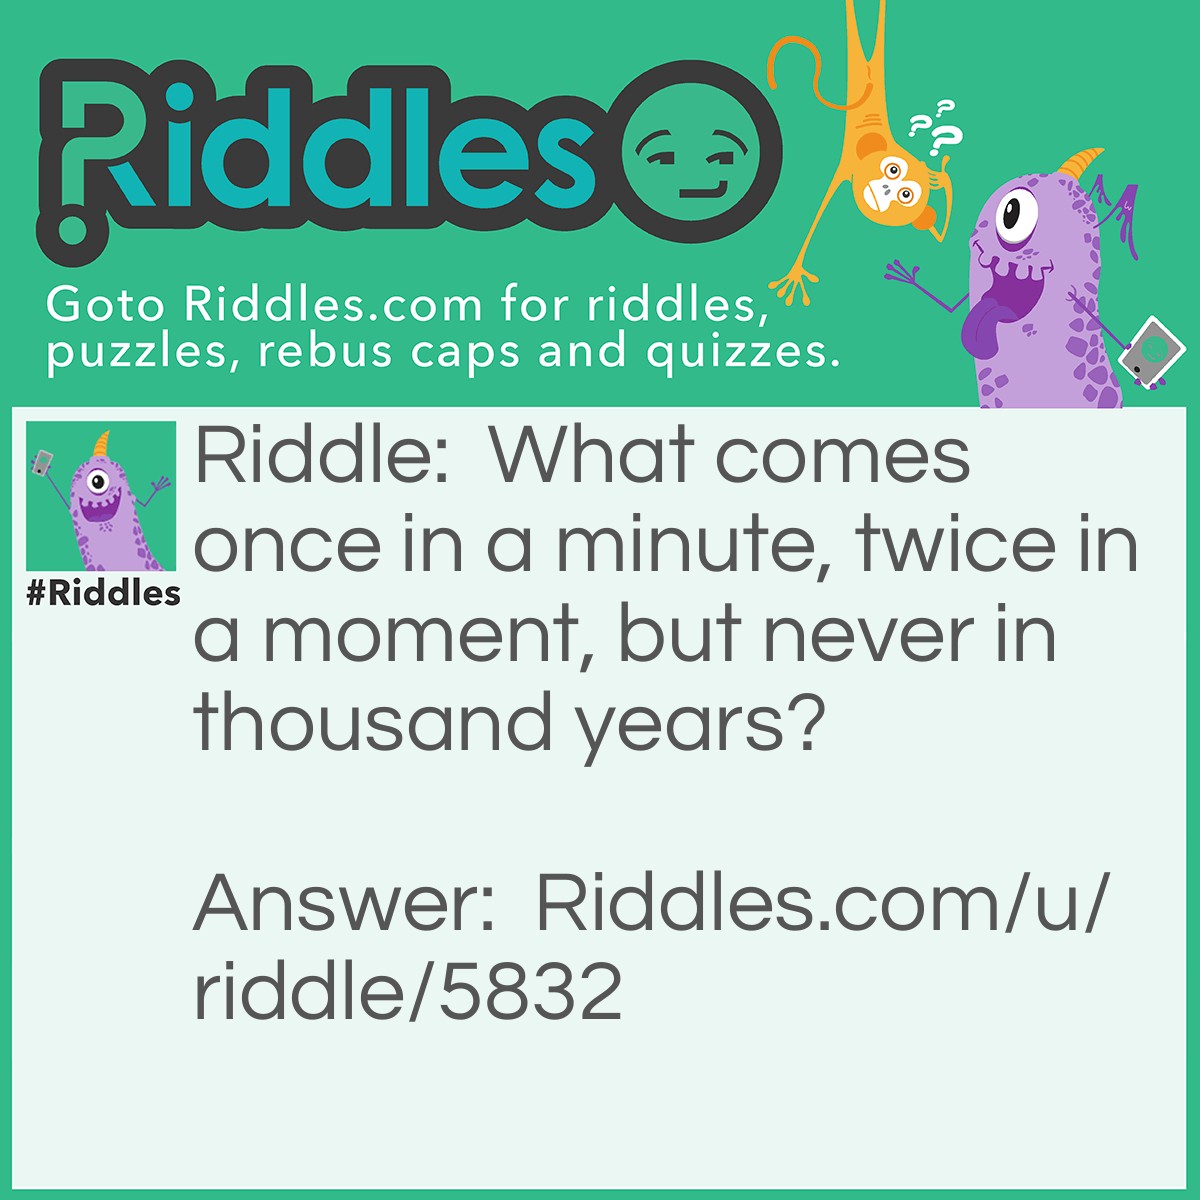 Riddle: What comes once in a minute, twice in a moment, but never in thousand years? Answer: The letter M.